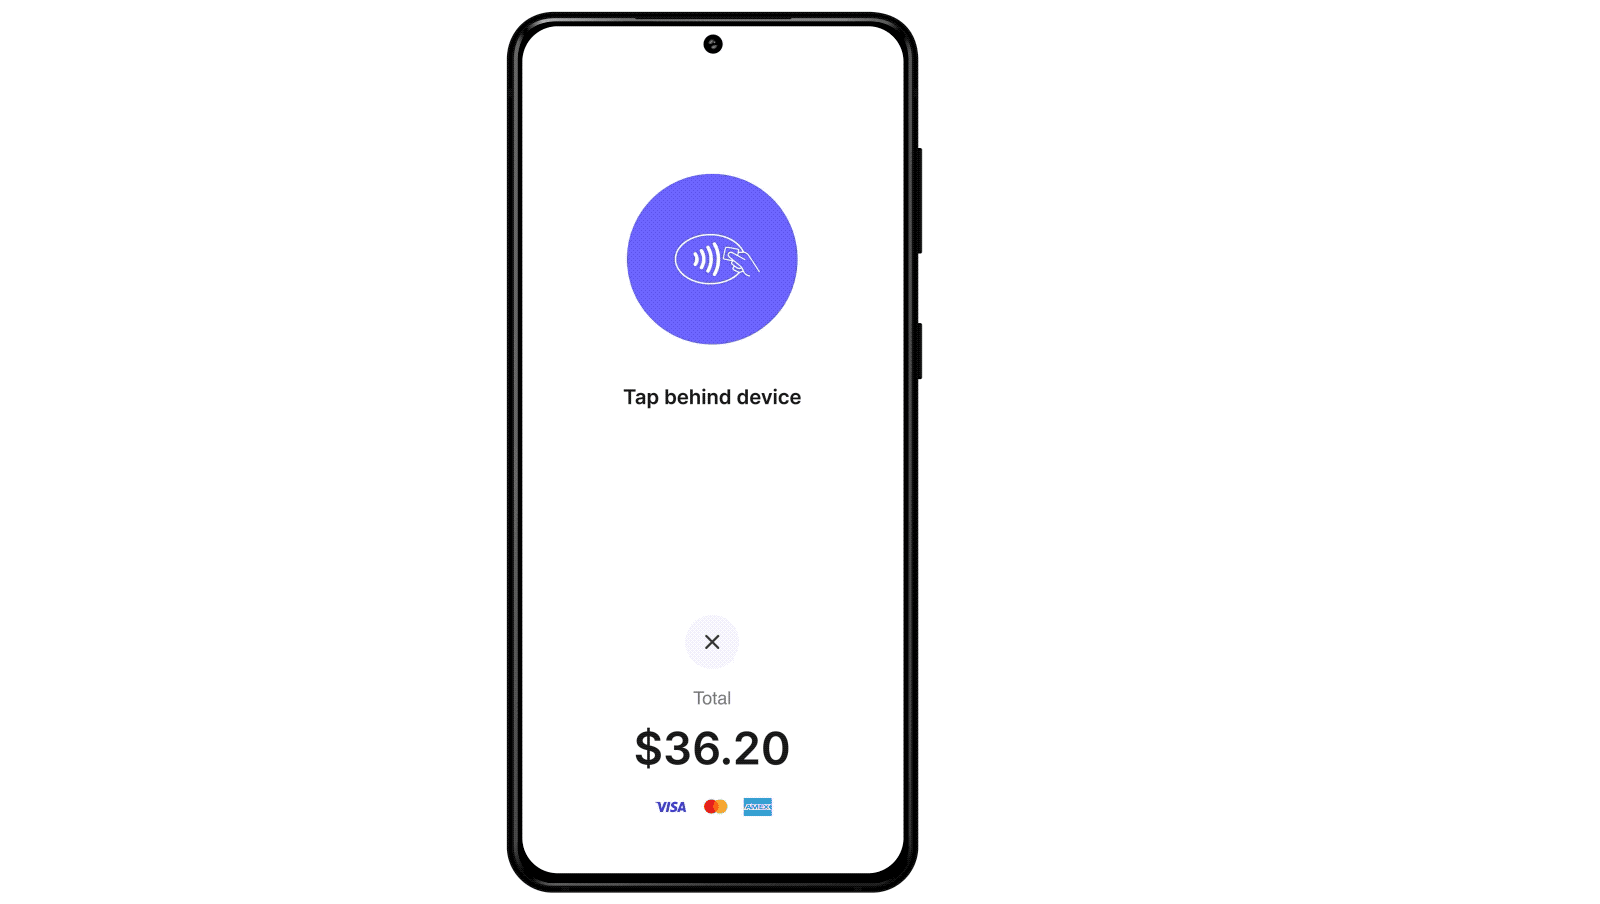 How Stripe leveraged Google Play to build an SDK for Tap to Pay on Android